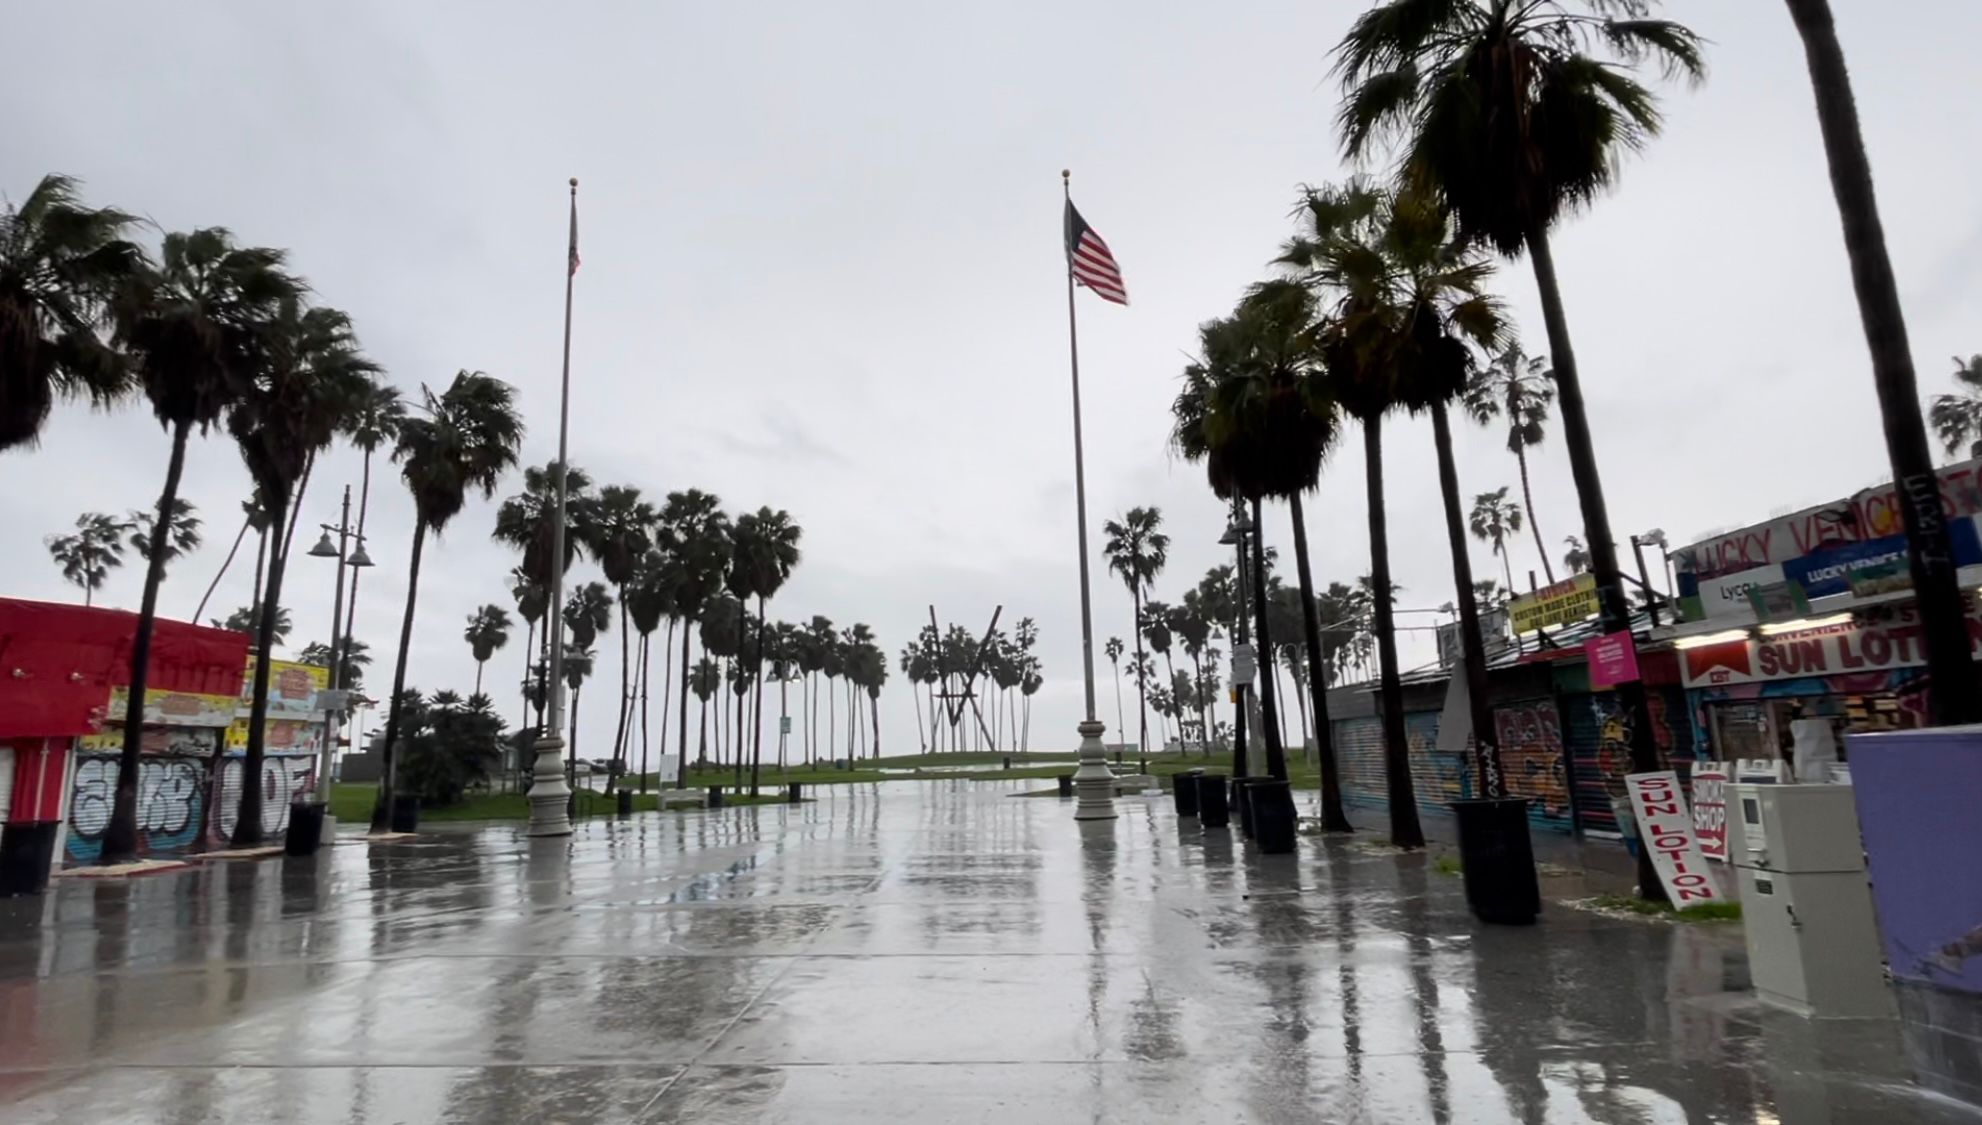 Venice Beach in California has been battered by the Pineapple Express